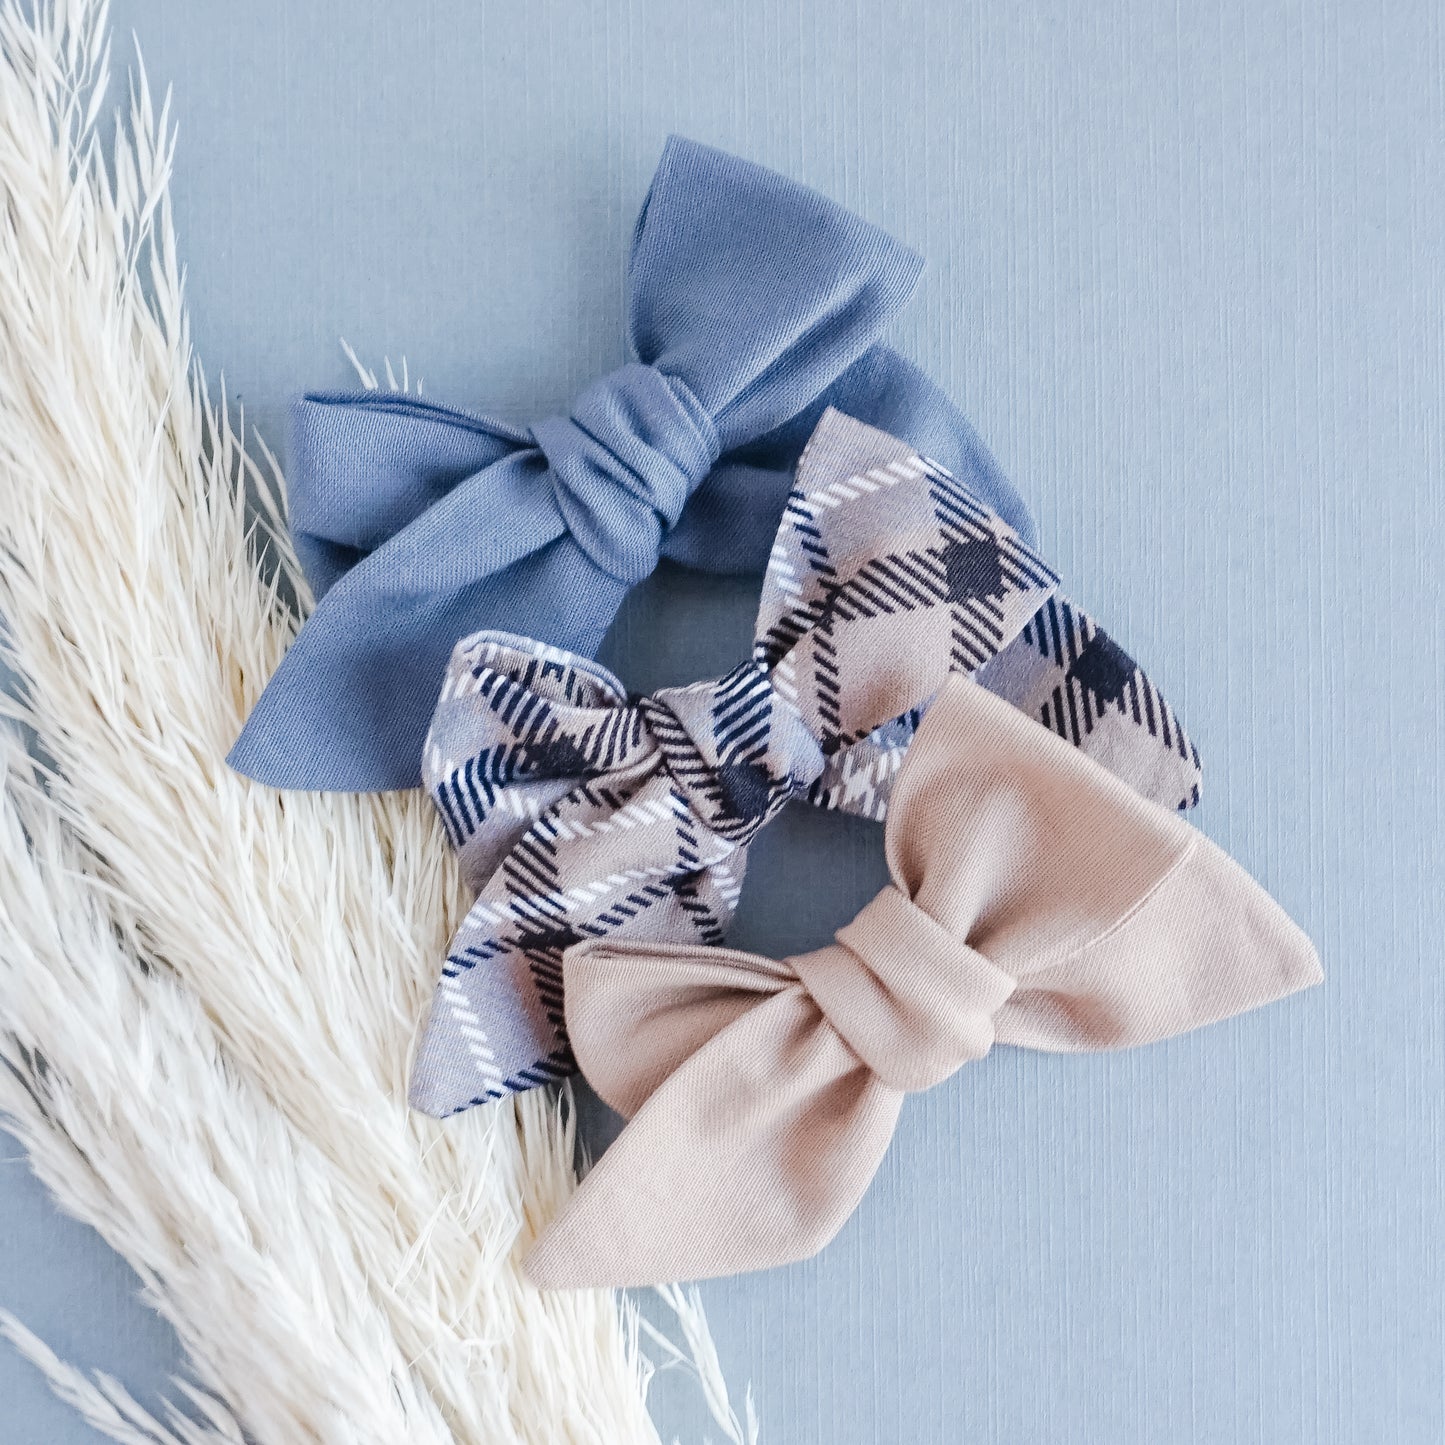 Handtied Fabric Bow - Warm Taupe